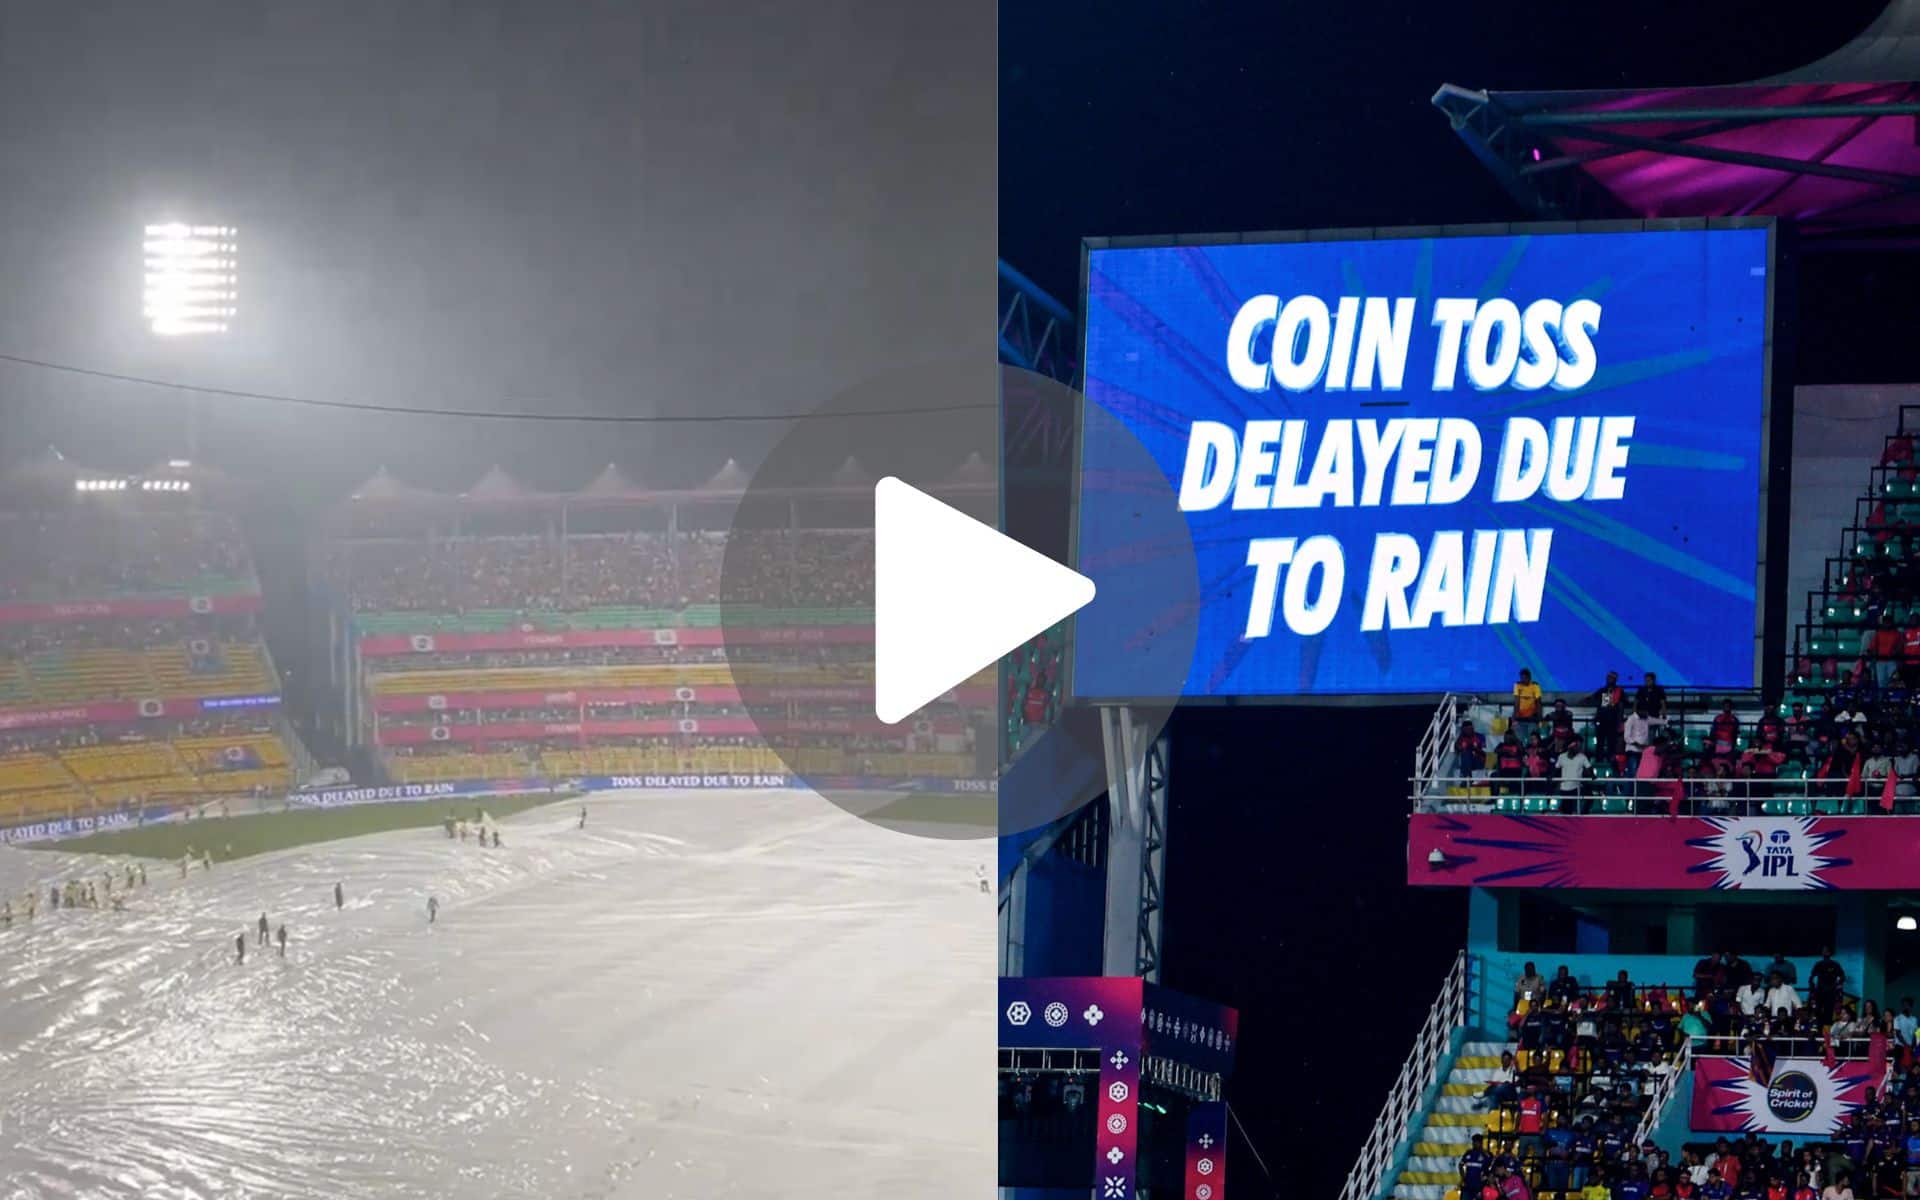 [Watch] RR Vs KKR To Be Washed Out? Rain Delays Toss In Guwahati